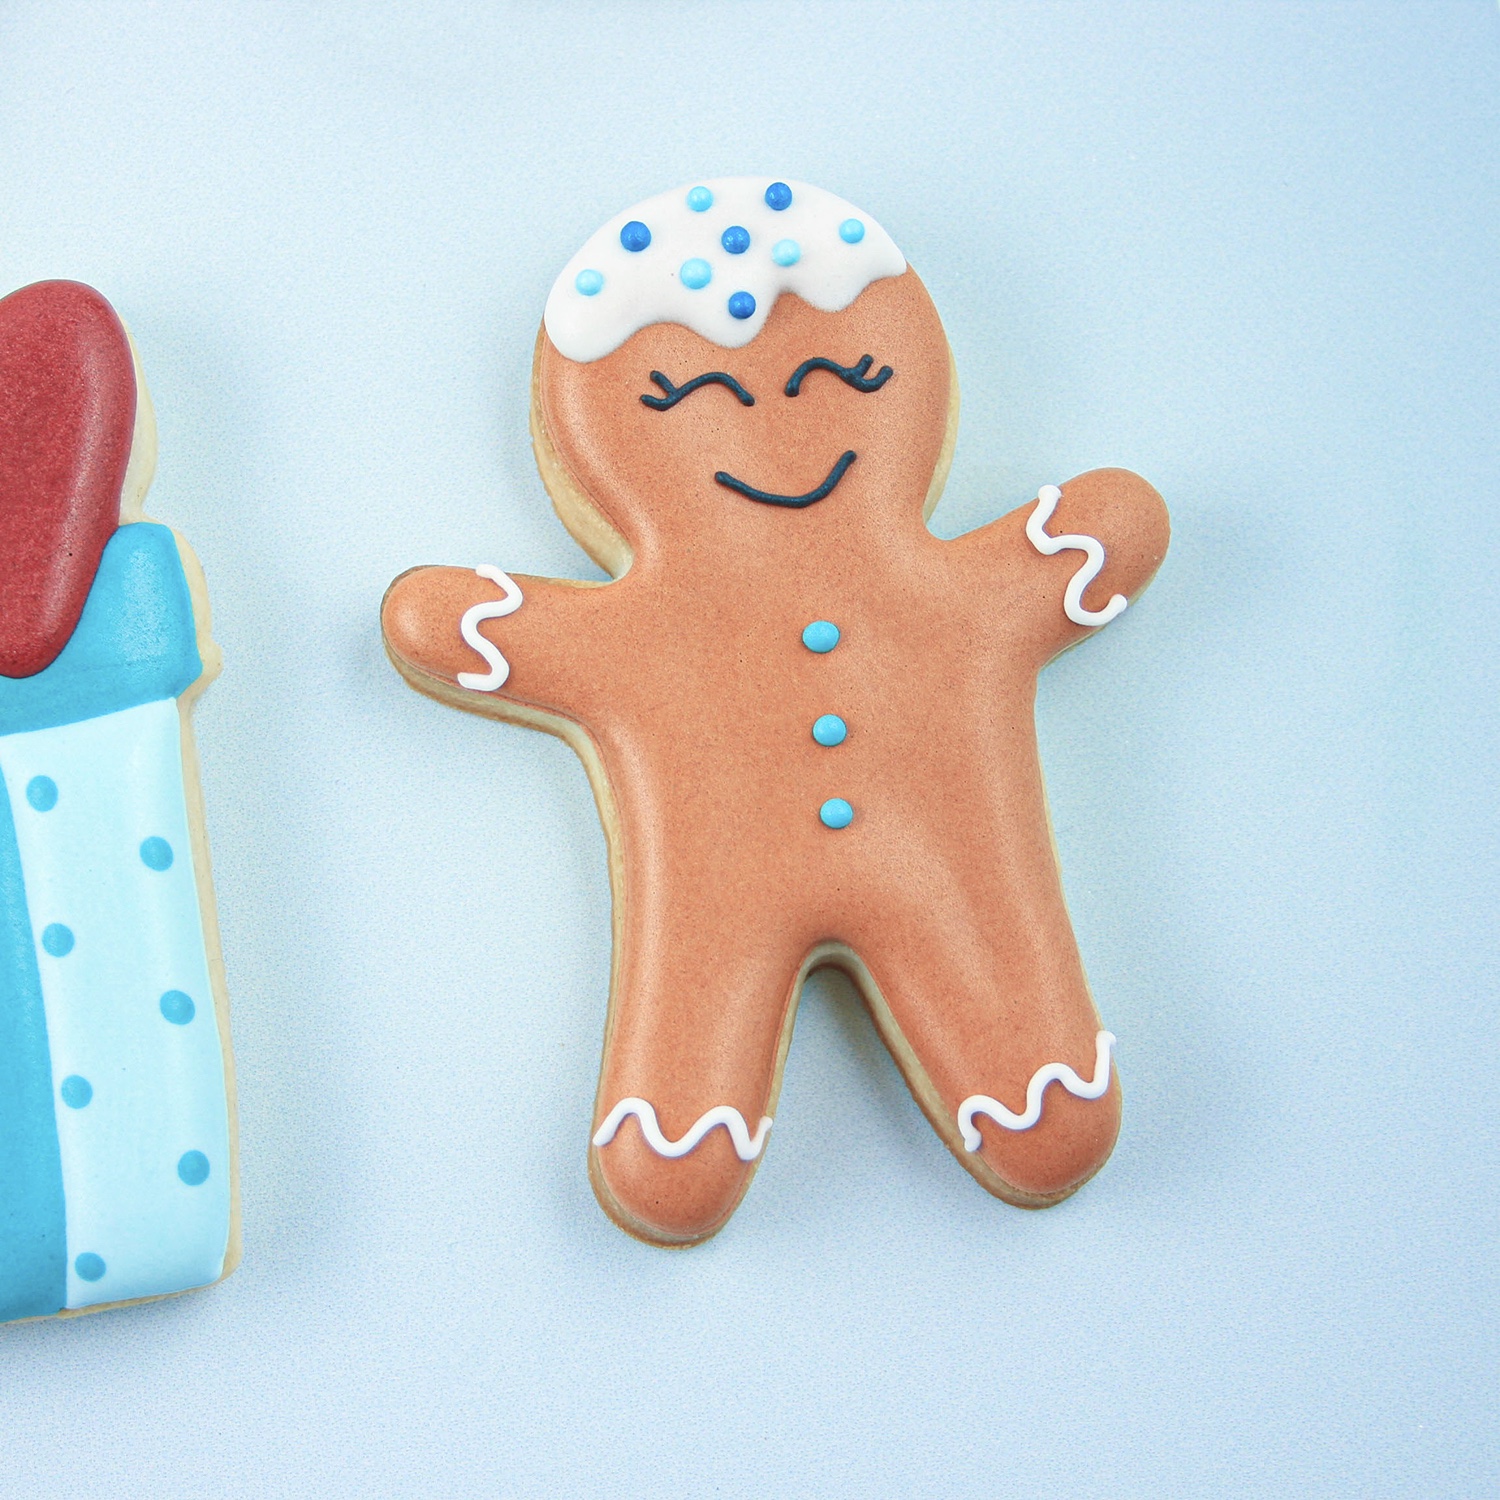 Gingerbread boy decorated with royal icing on his head and blue buttons